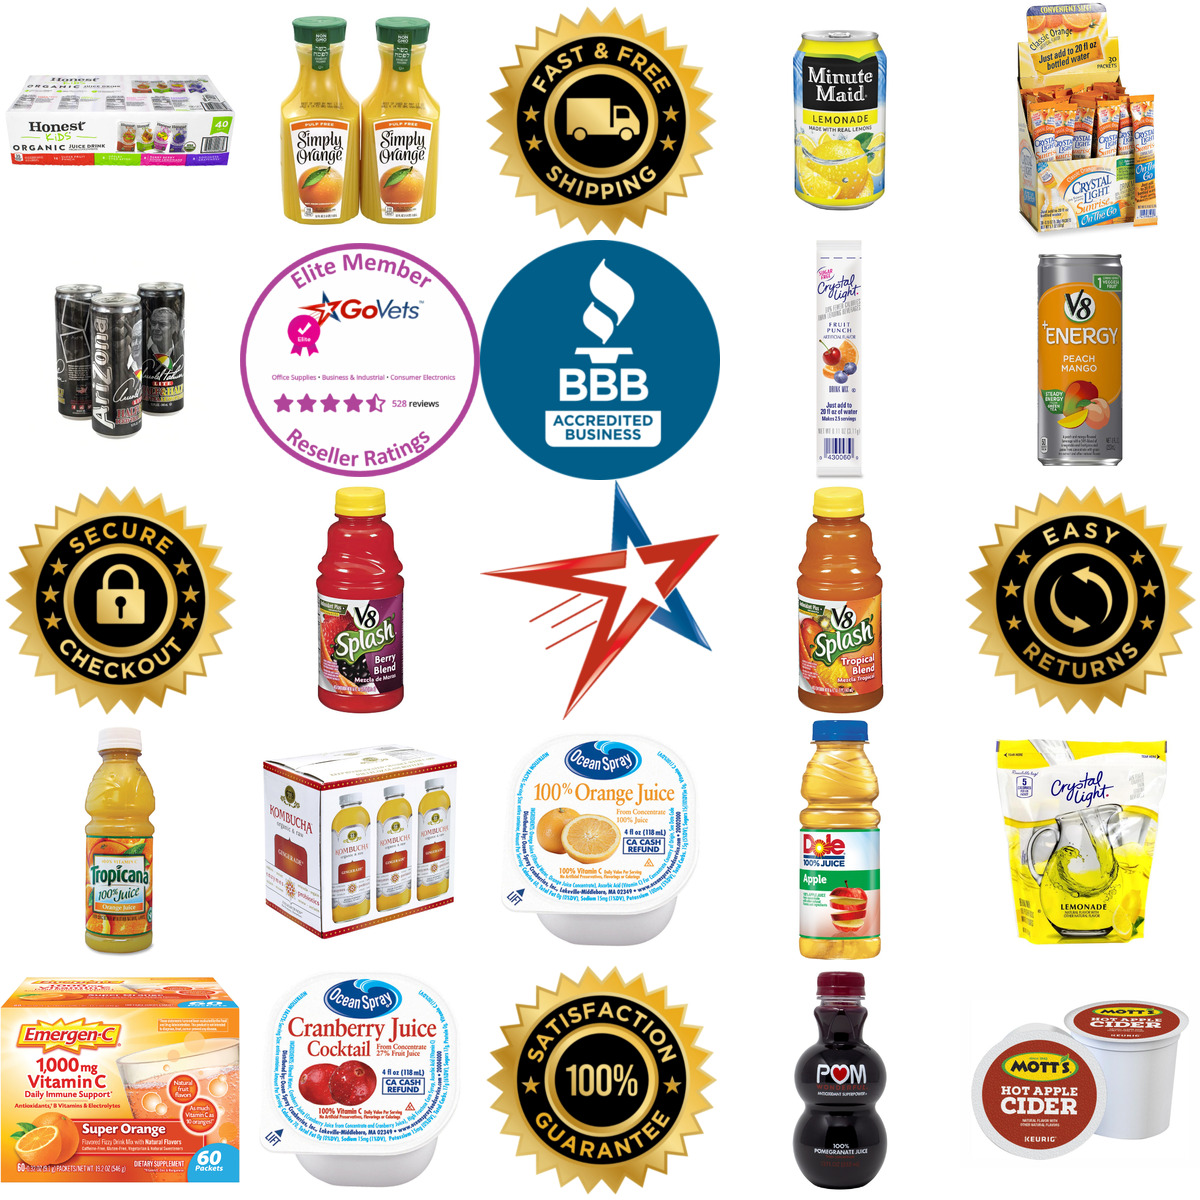 A selection of Juice products on GoVets